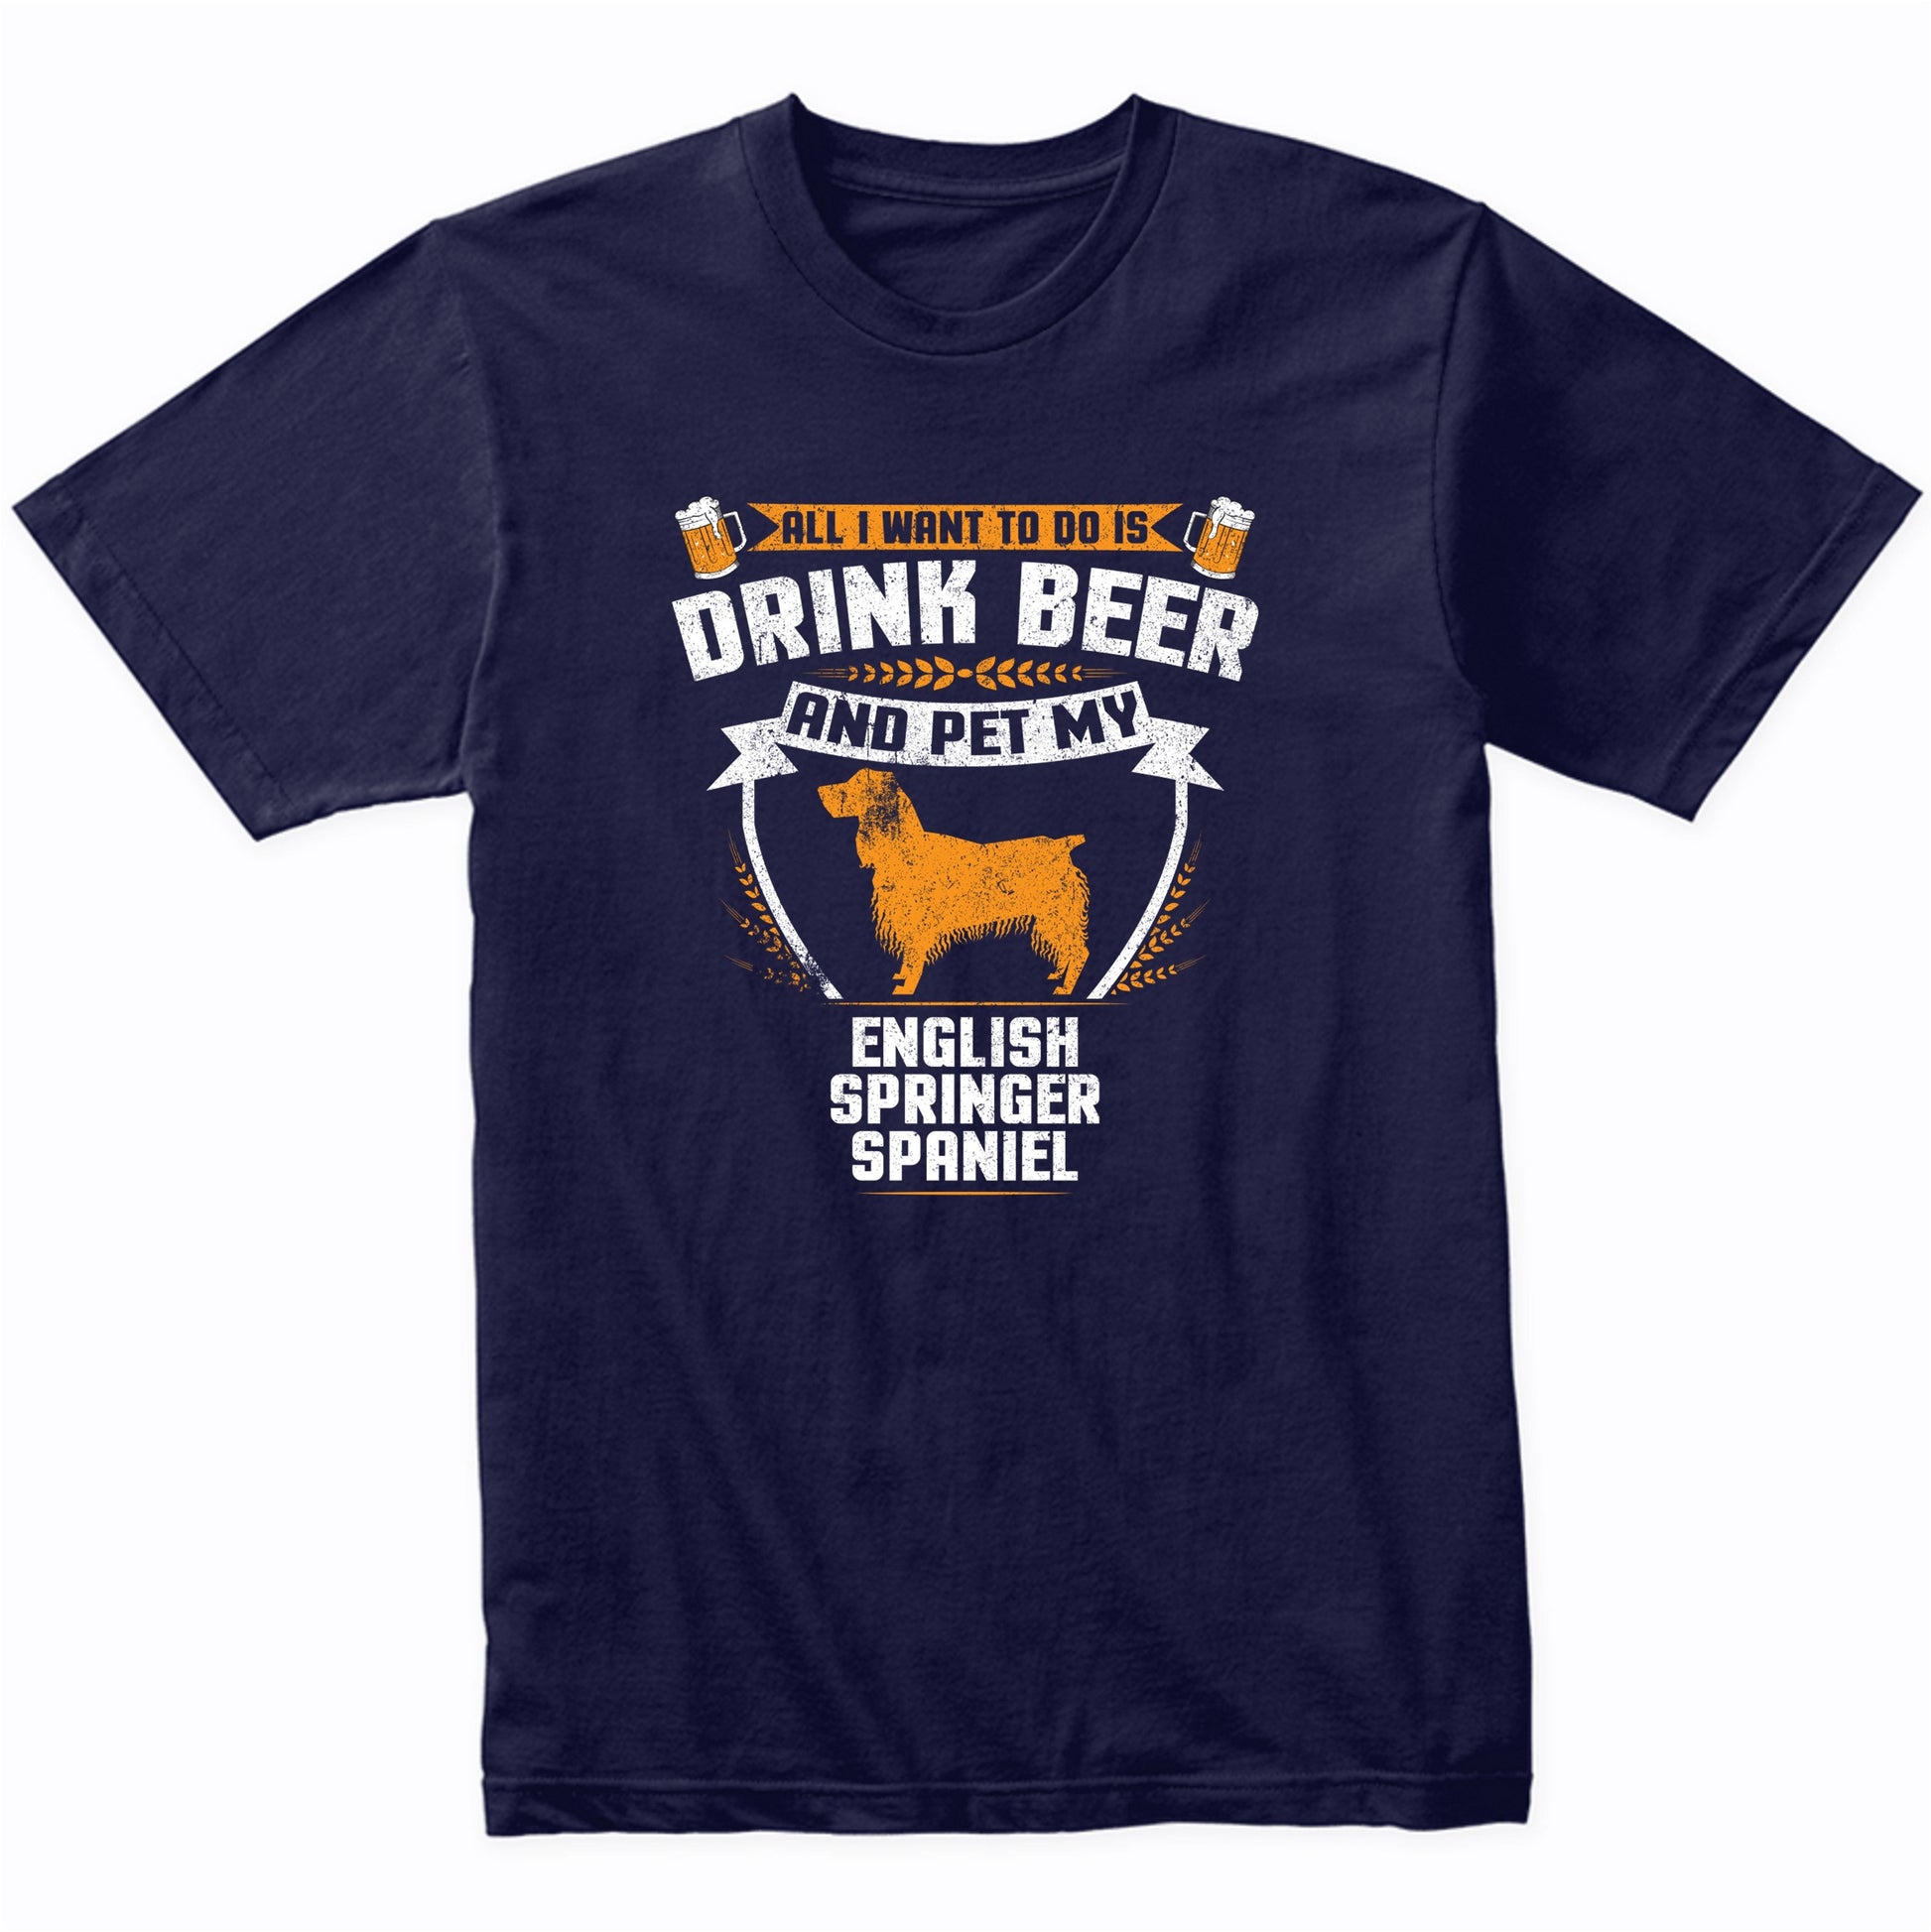 All I Want To Do Is Drink Beer And Pet My English Springer Spaniel Funny Dog Owner Shirt